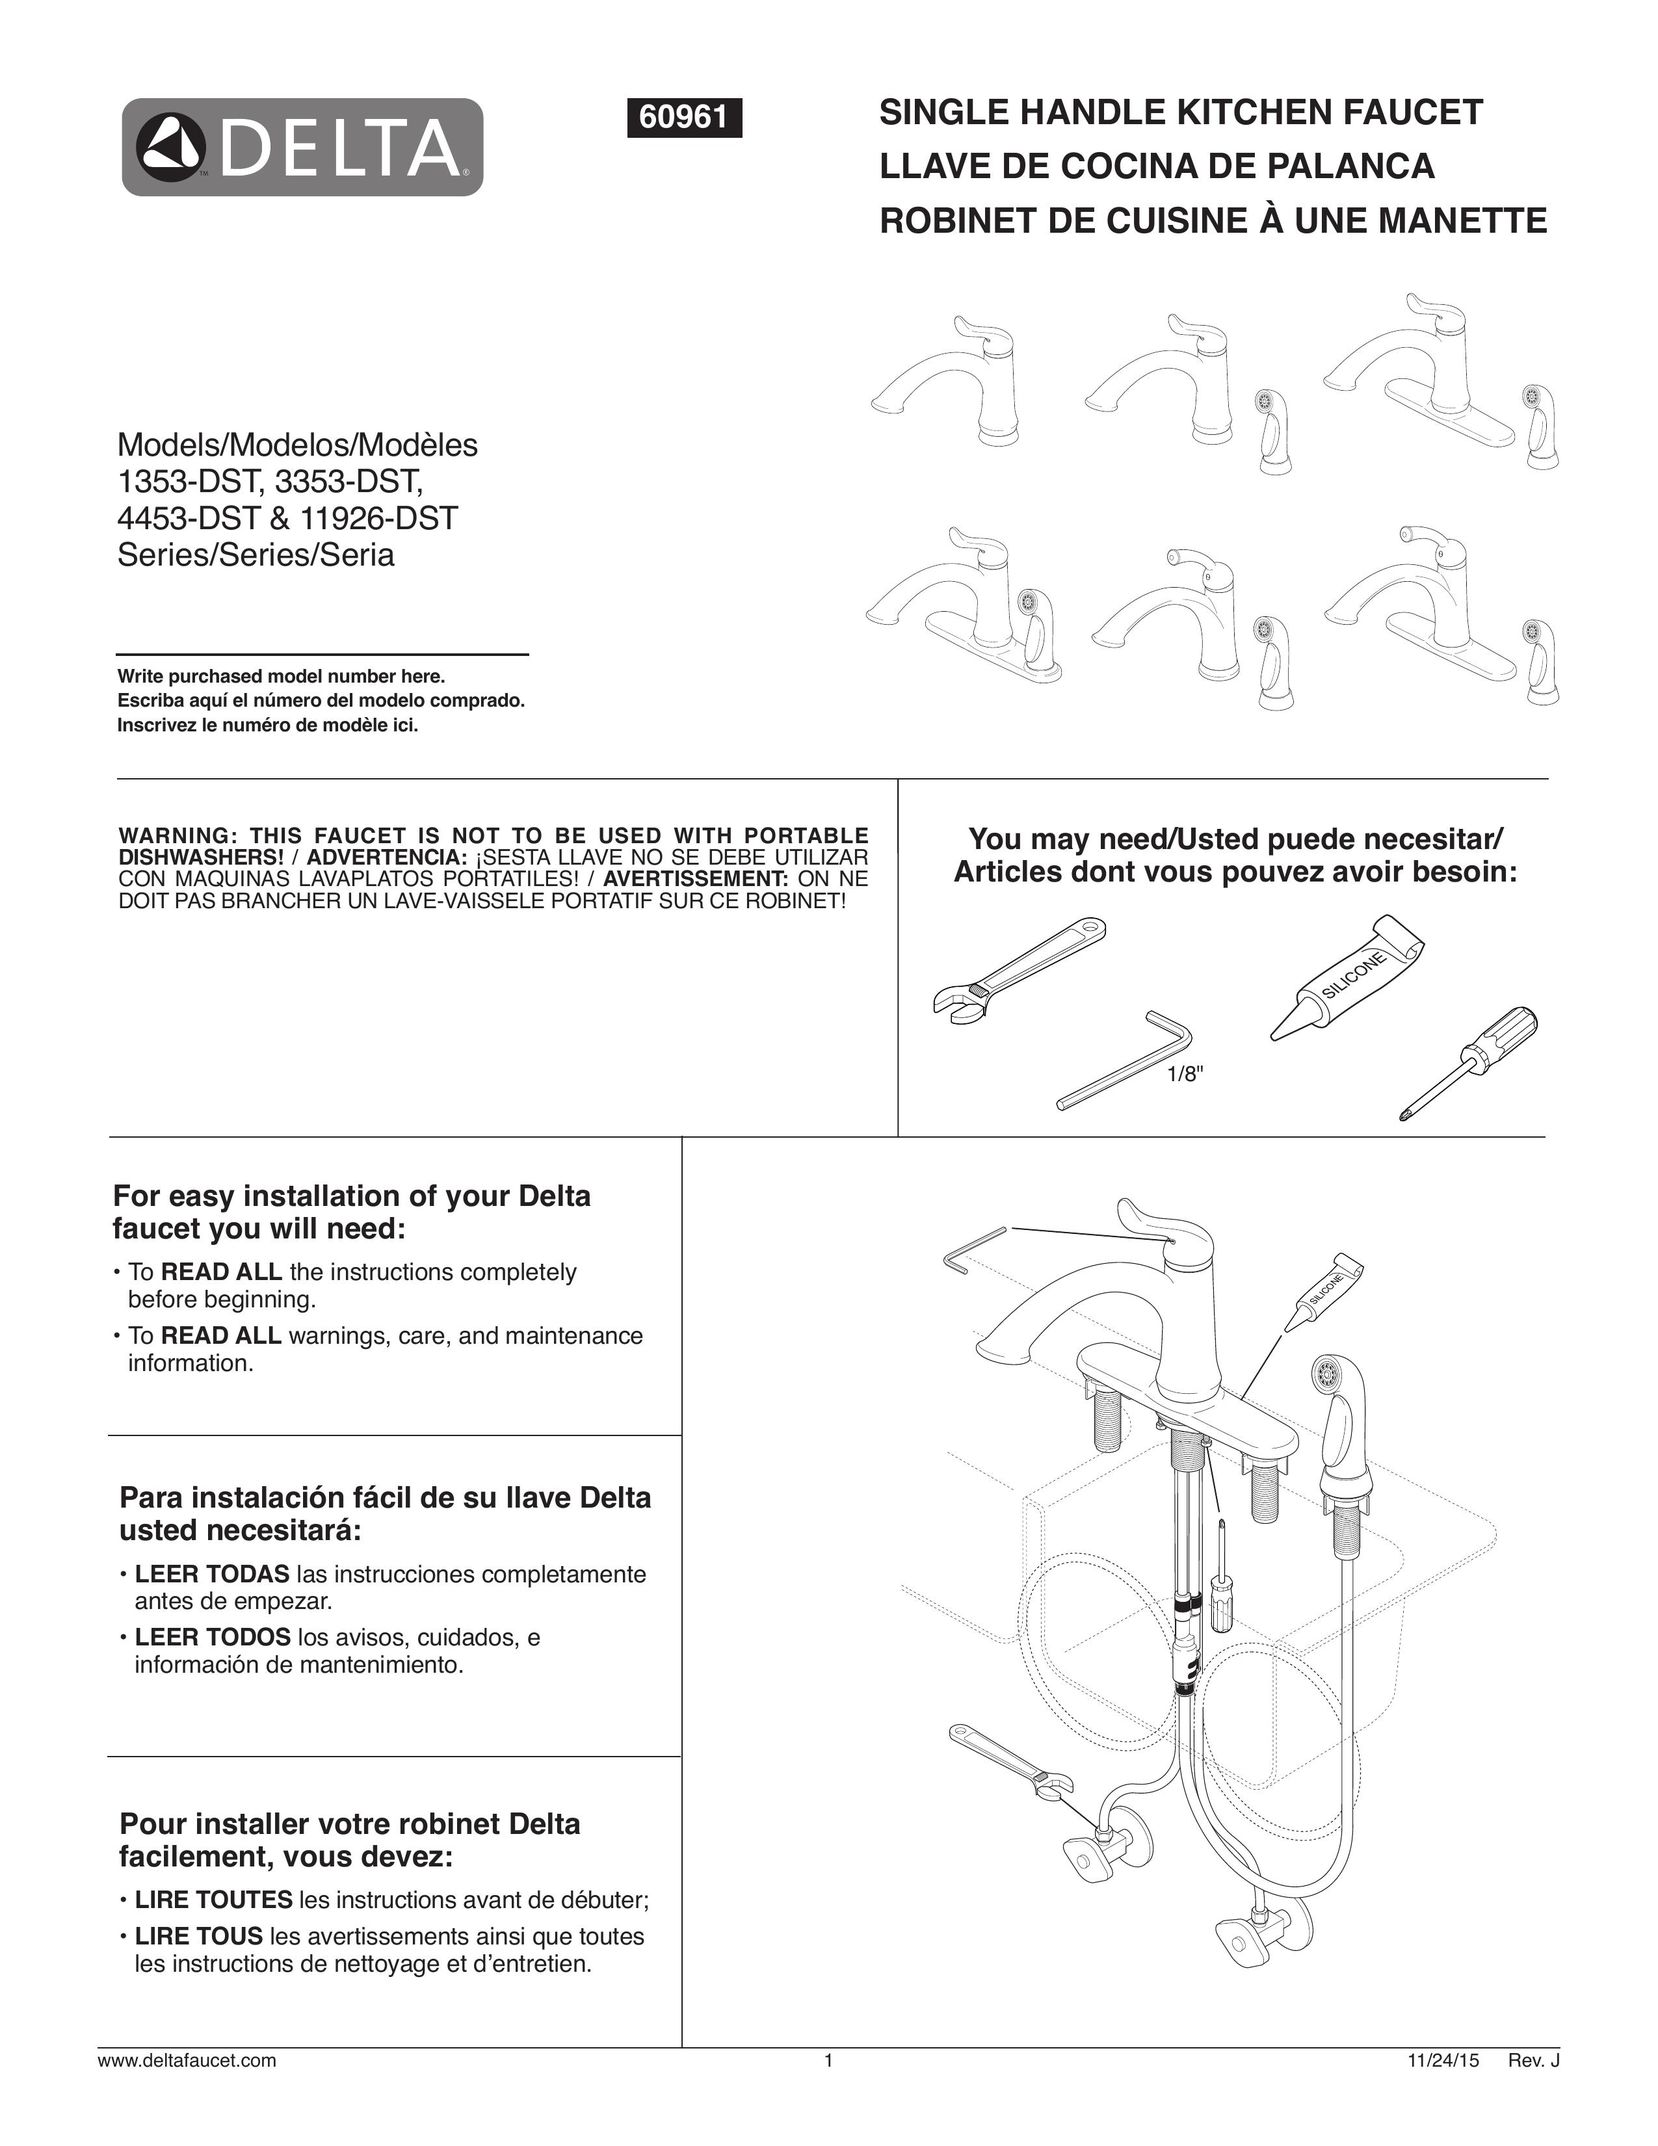 Delta Faucet 4453-DST Plumbing Product User Manual